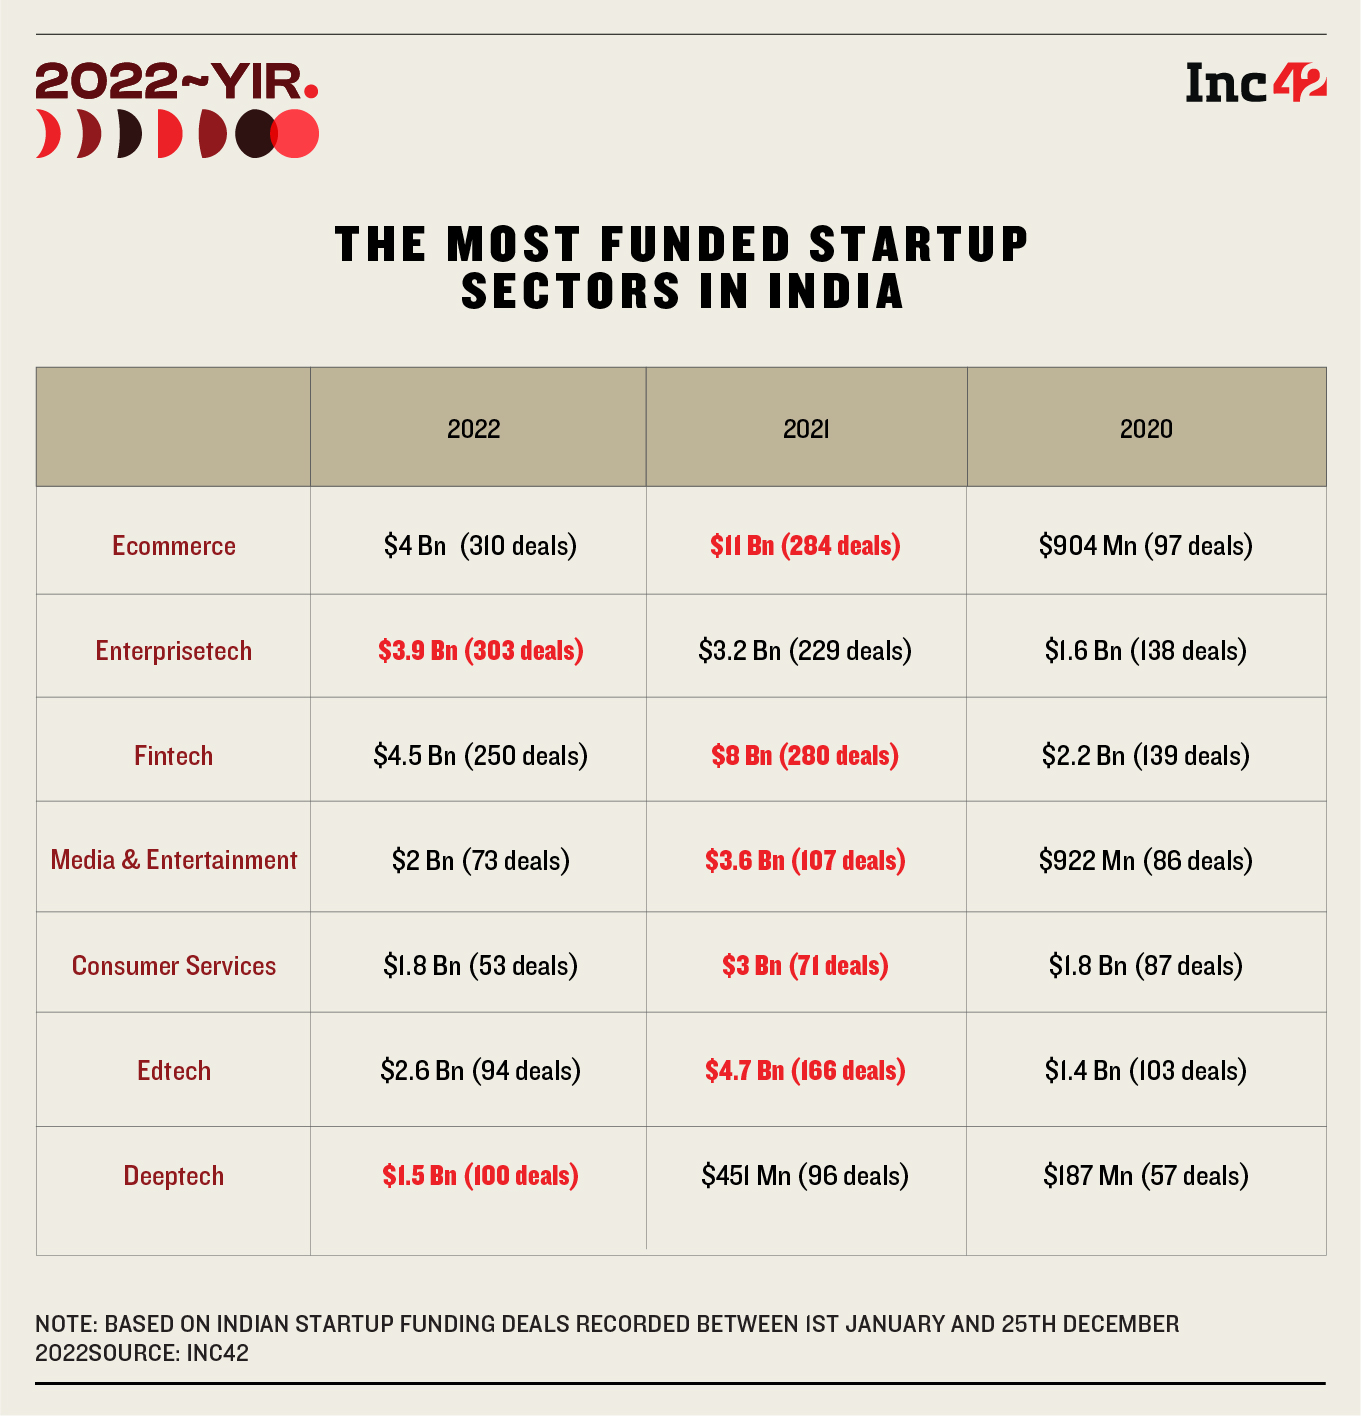 [2022 In review] $25 Bn Funding, 21 Unicorns: An Year Of Funding Winter, Bearish Market Sentiment And Failed IPOs For Indian Startup Economy